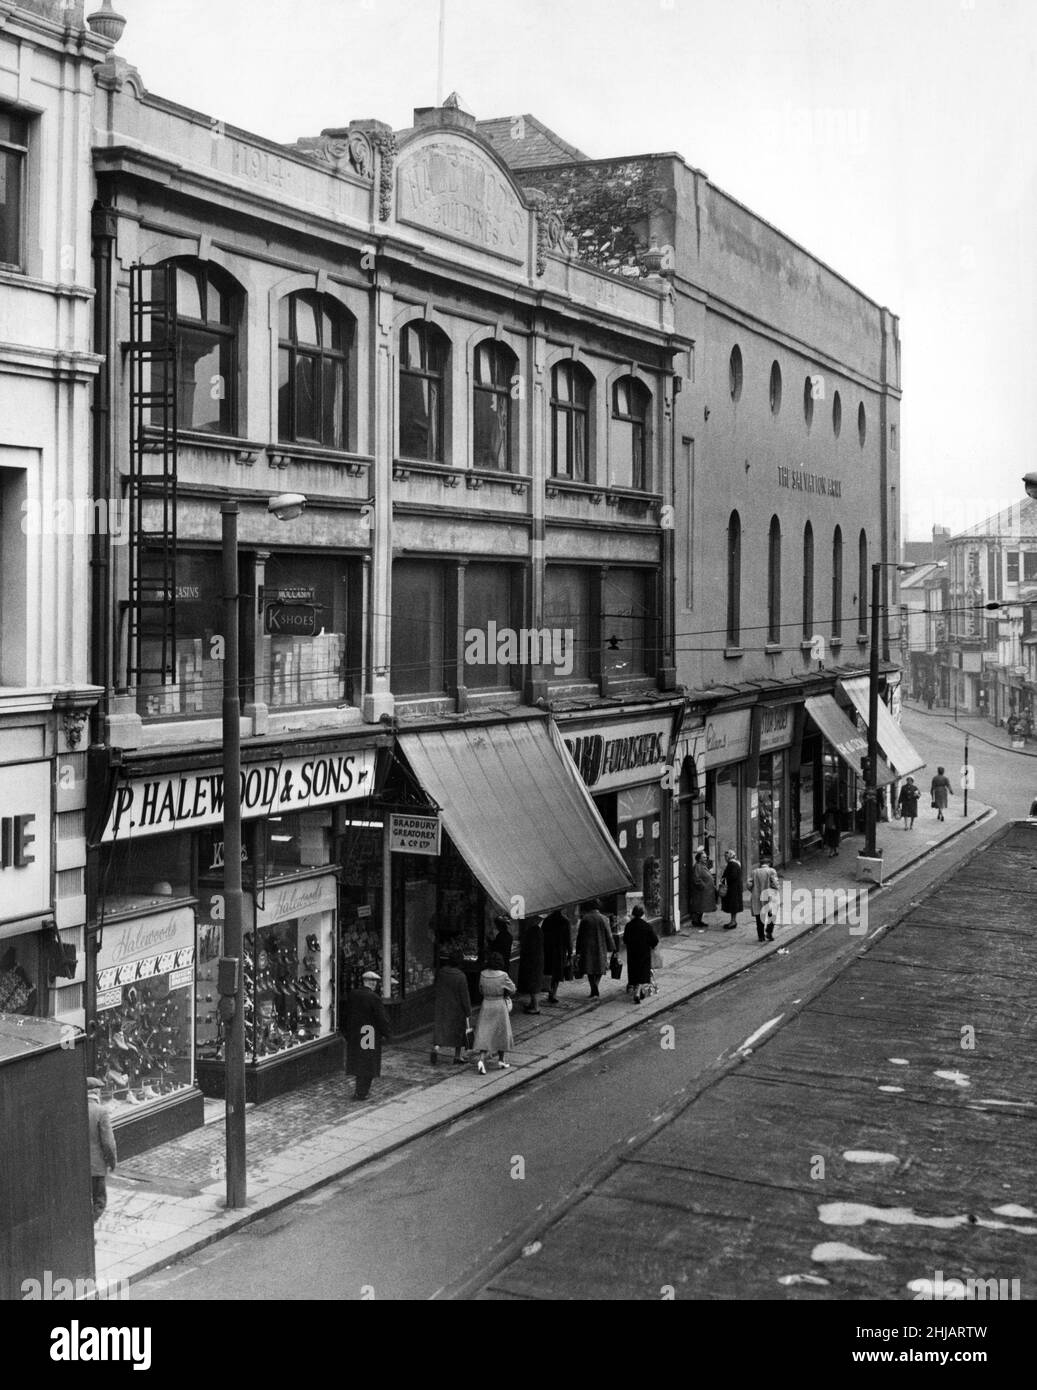 Cardiff city council have agreed to spend £91,582 on acquiring the Hayes block of buildings, pictured, which is only a small section of the immense redevelopment planned for the city's central area. The Hayes, is a commercial area in Cardiff, South Glamorgan, Wales. Circa 1962. Stock Photo